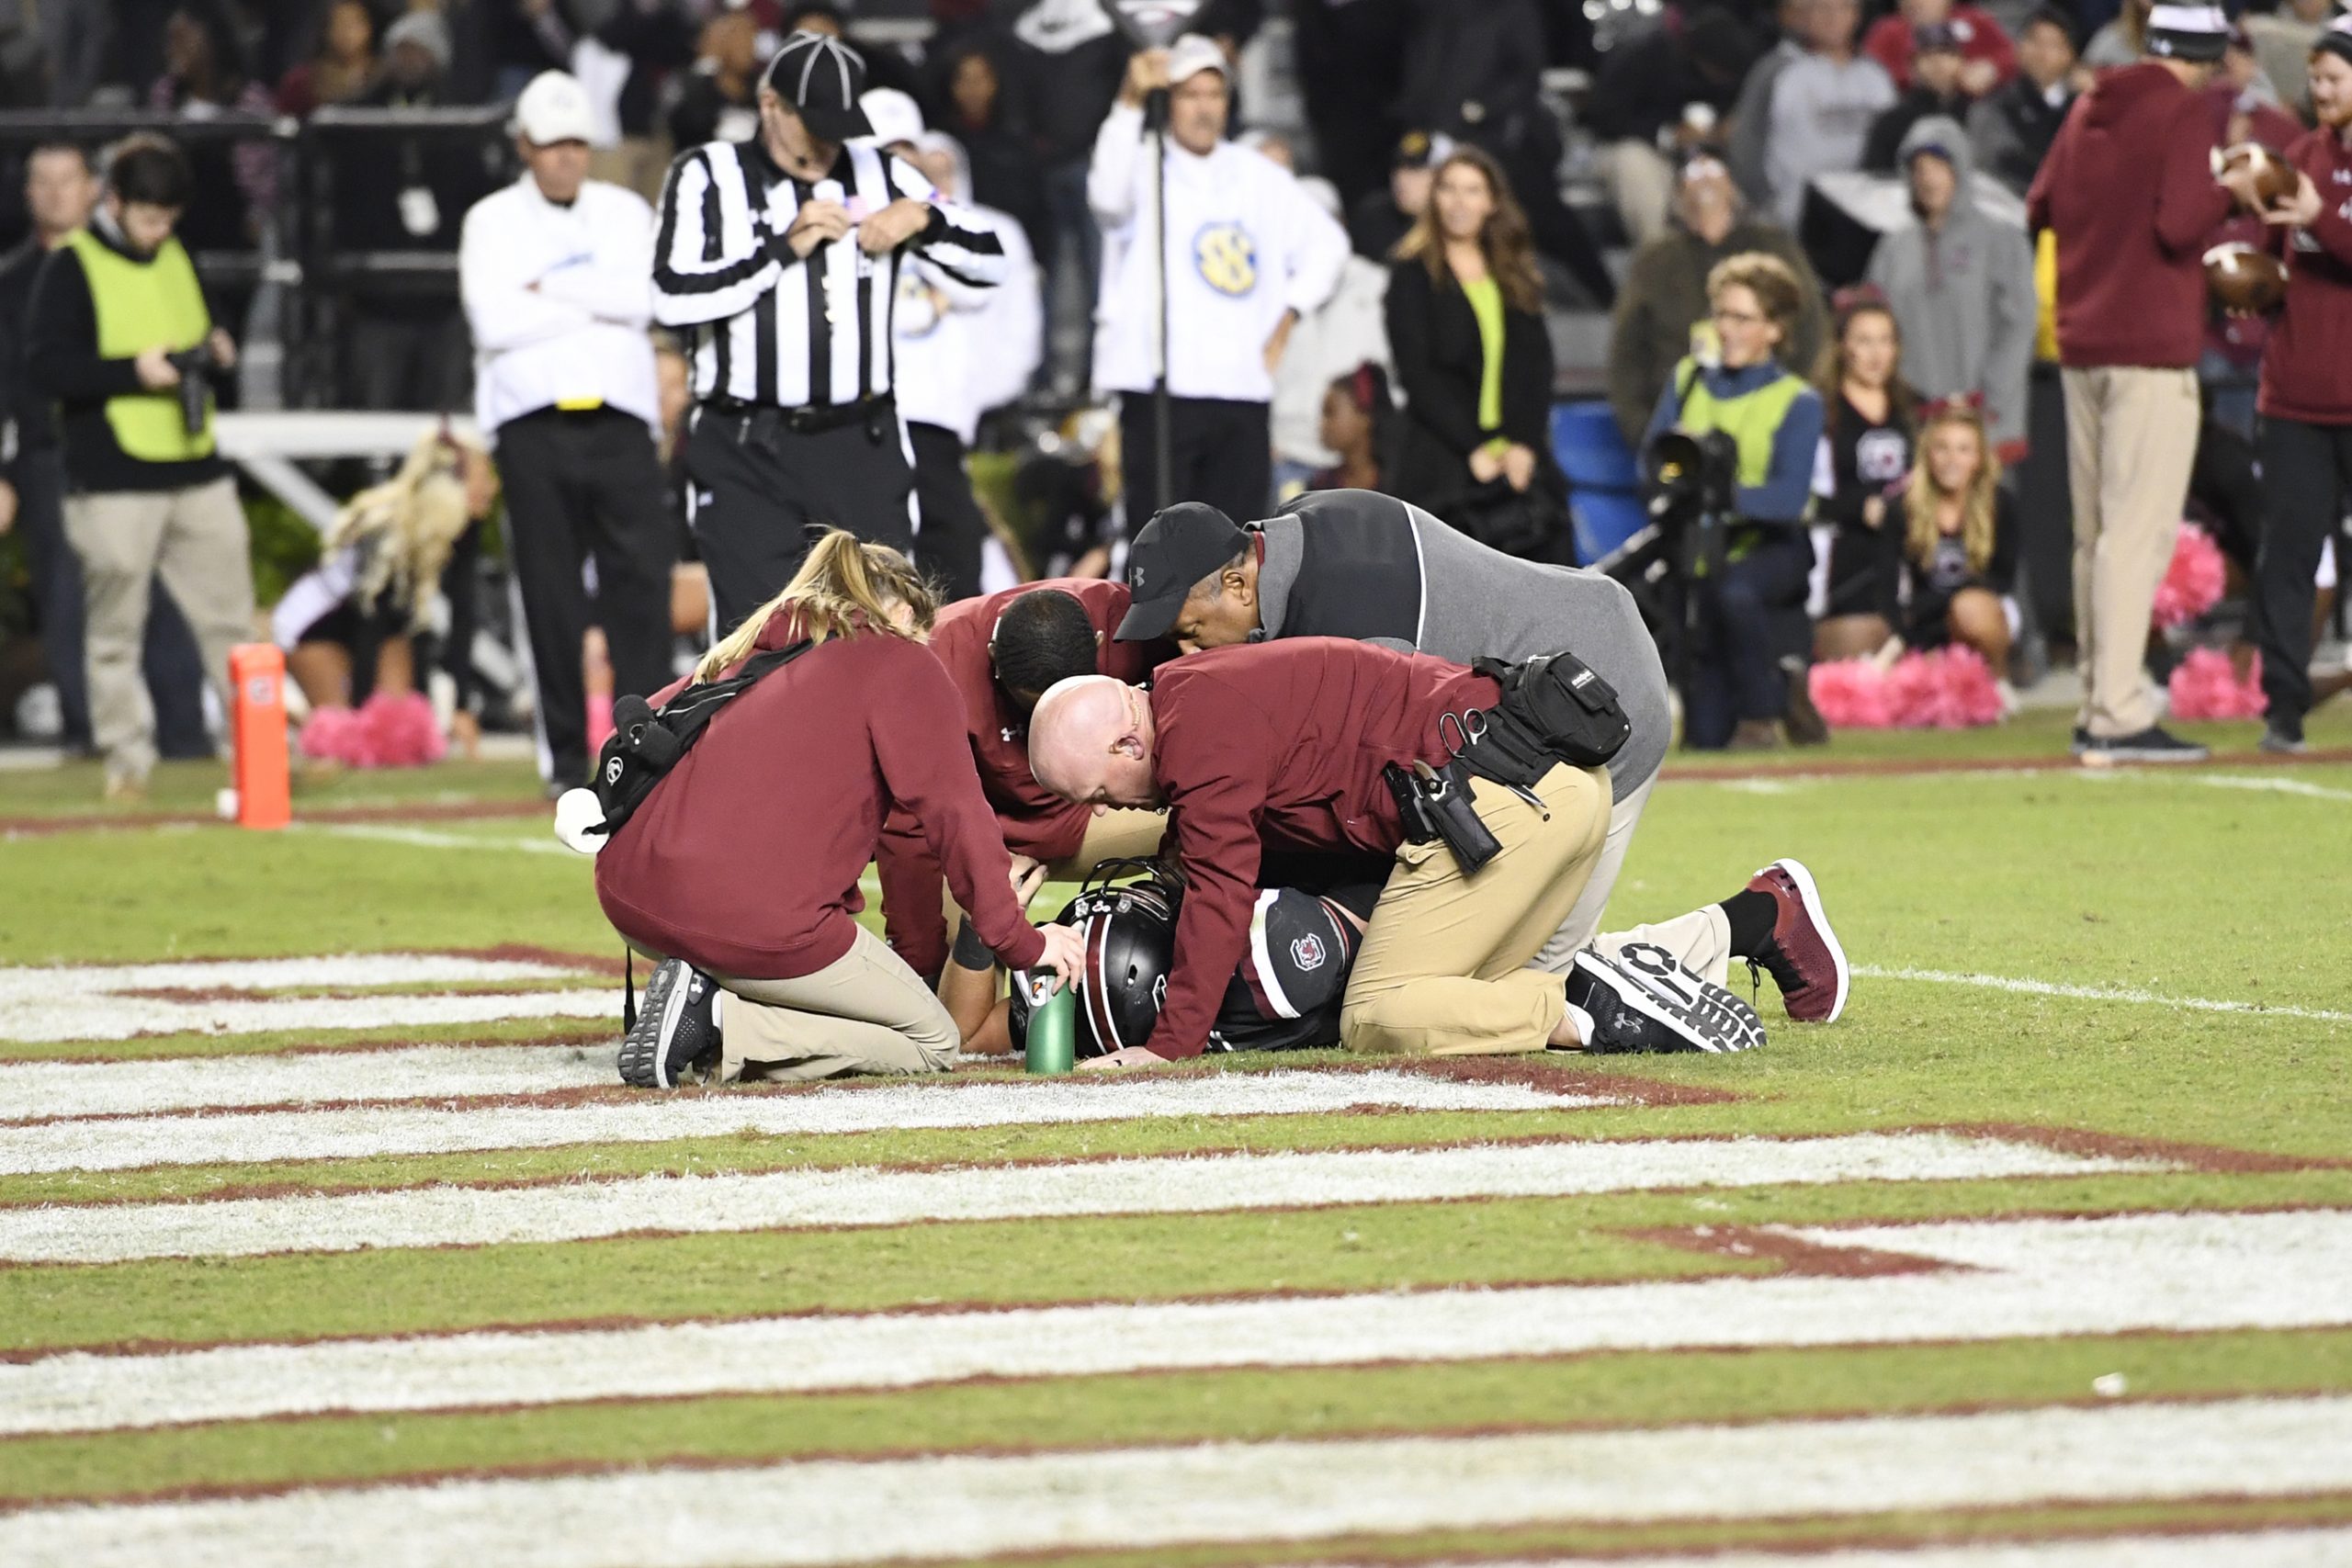 The Gamecocks Athletics medical staff assists an injured player on the field. Clint Haggard, head athletic trainer for the Gamecocks, has been with the football program for 14 years. He leads a group of six athletic trainers assigned to football. It’s the athletic trainers’ job to get the athlete back out on the field as quickly and safely as possible. 